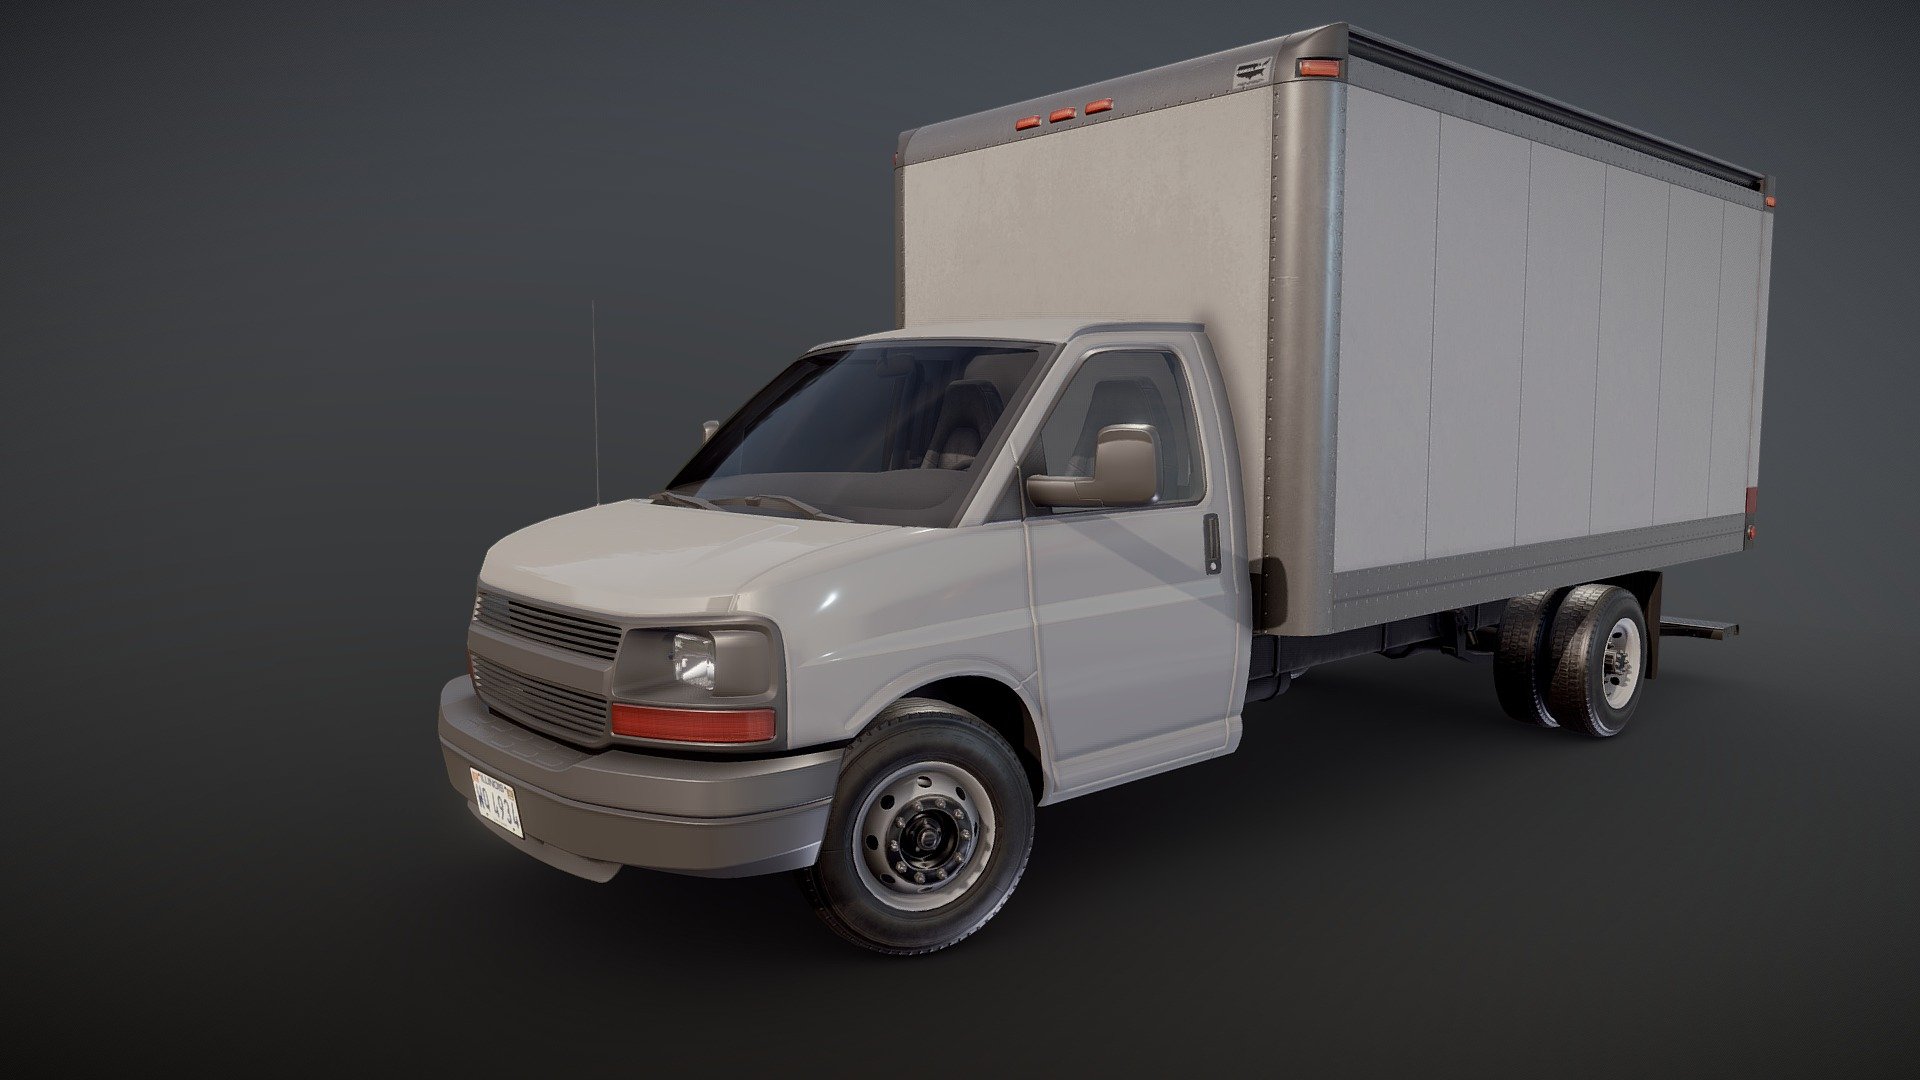 2010 Industrial box van game ready model.

Full textured model with clean topology.

High accuracy exterior model

Different tires for rear and front wheels.

Full model - 42430 tris 24878 verts

Lowpoly interior - 3906 tris 2167verts

Wheels - 13350 tris 7762 verts

High detailed rims and tires, with PBR maps(Base_Color/Metallic/Normal/Roughness.png2048x2048 )

Original scale. Lenght 7,4m , width 2.5m , height 3m.

Model ready for real-time apps, games, virtual reality and augmented reality.

Asset looks accuracy and realistic and become a good part of your project 3d model